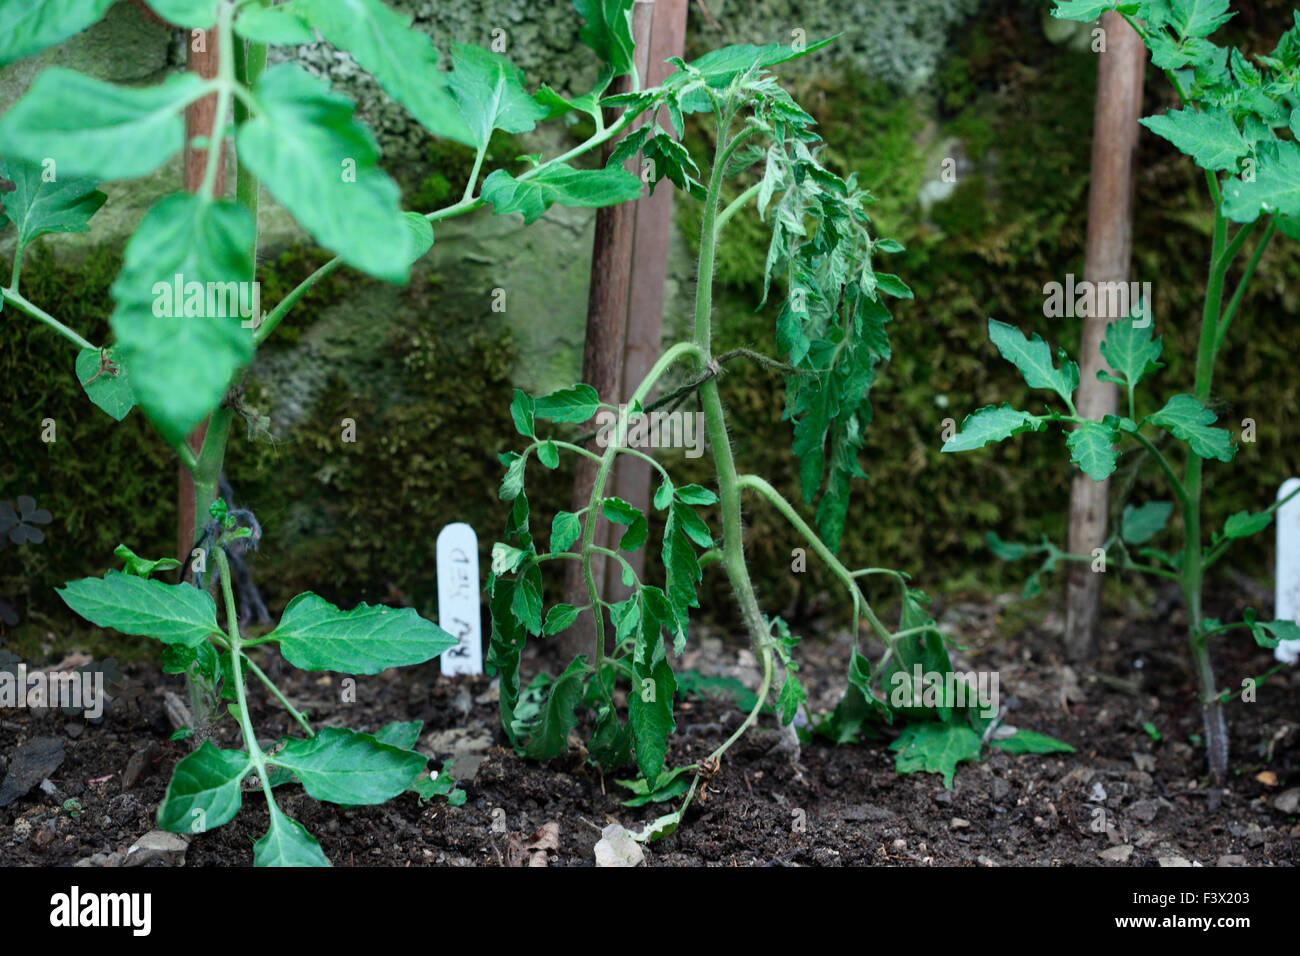 Foot rot causes sudden wilting in tomato plant Stock Photo